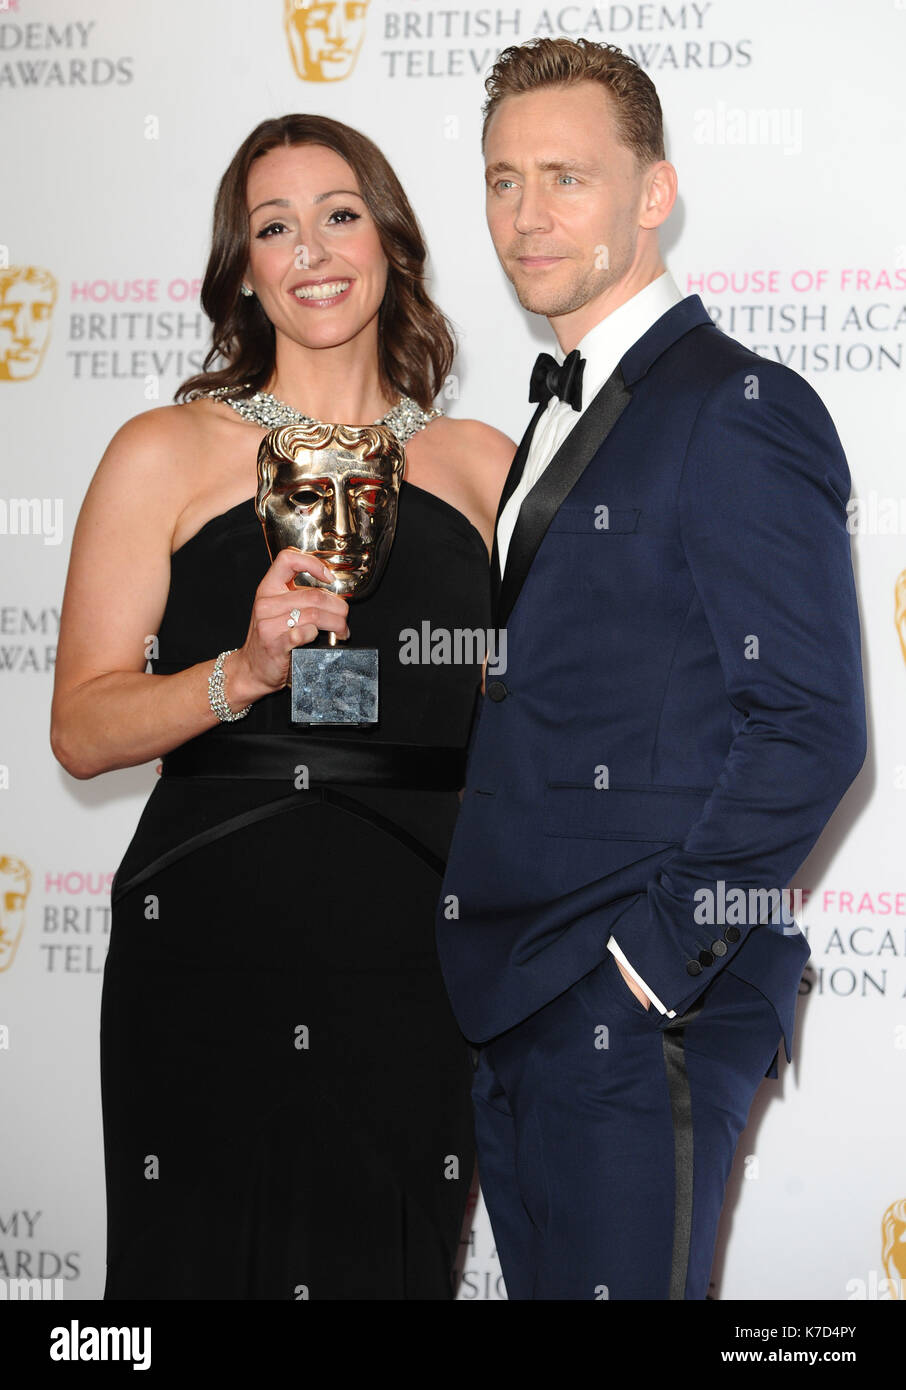 Photo Must Be Credited ©Kate Green/Alpha Press 079965 08/05/2016 Suranne Jones and Tom Hiddleston at the House of Fraser British Academy Television Awards Bafta Pressroom held at the Royal Festival Hall in London Stock Photo